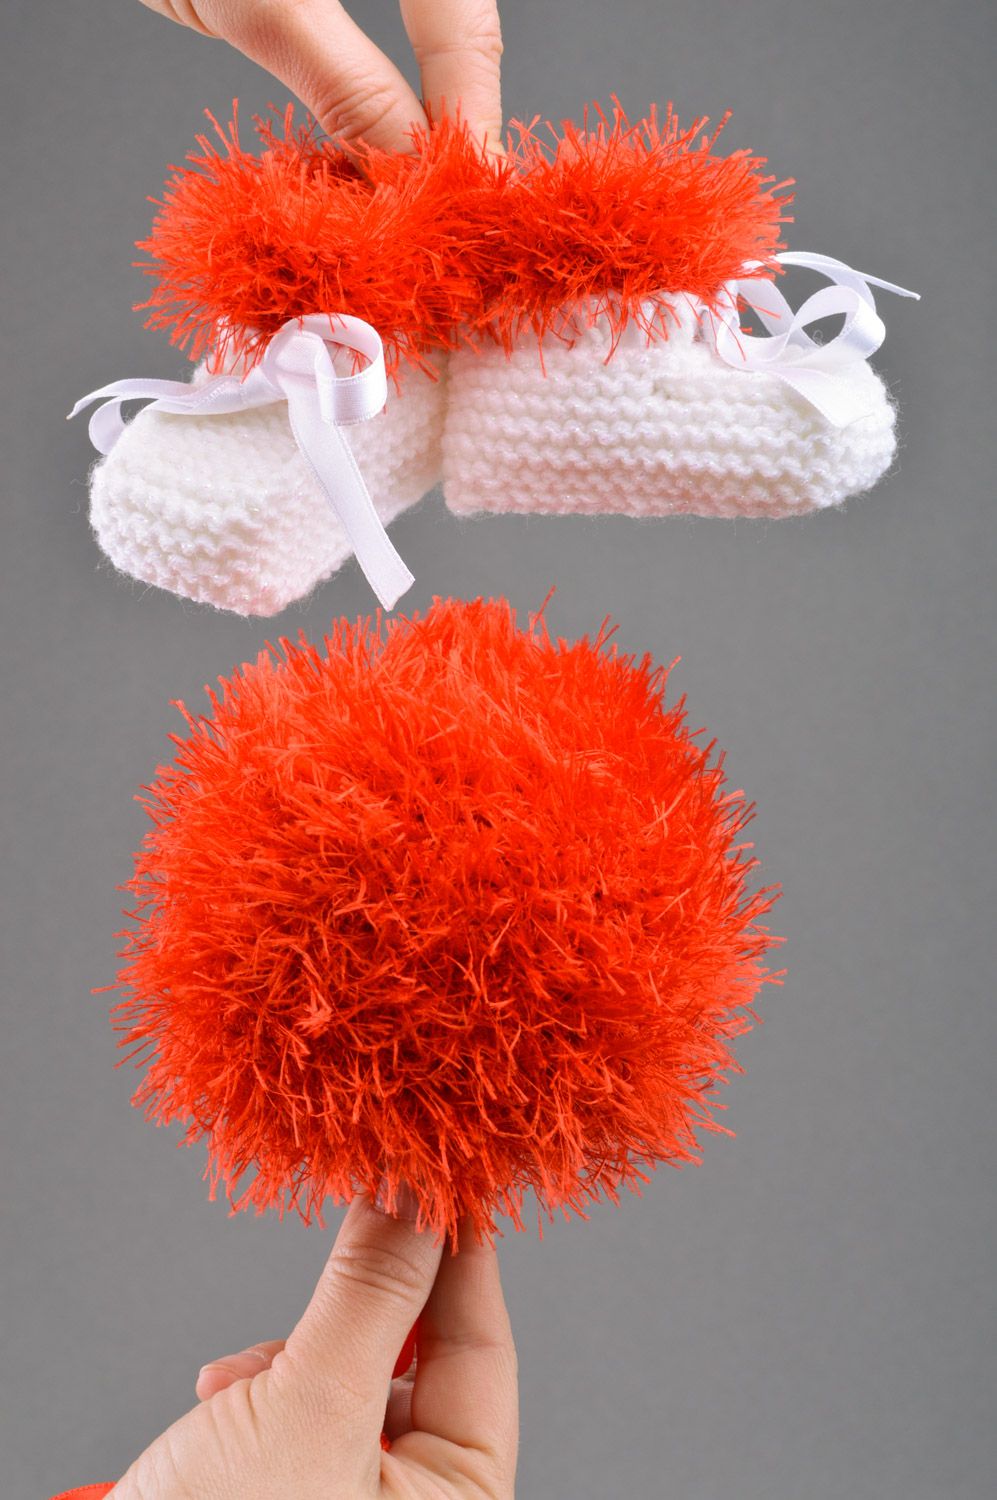 Handmade crochet soft toy ball and knitted baby booties in red and white colors photo 3